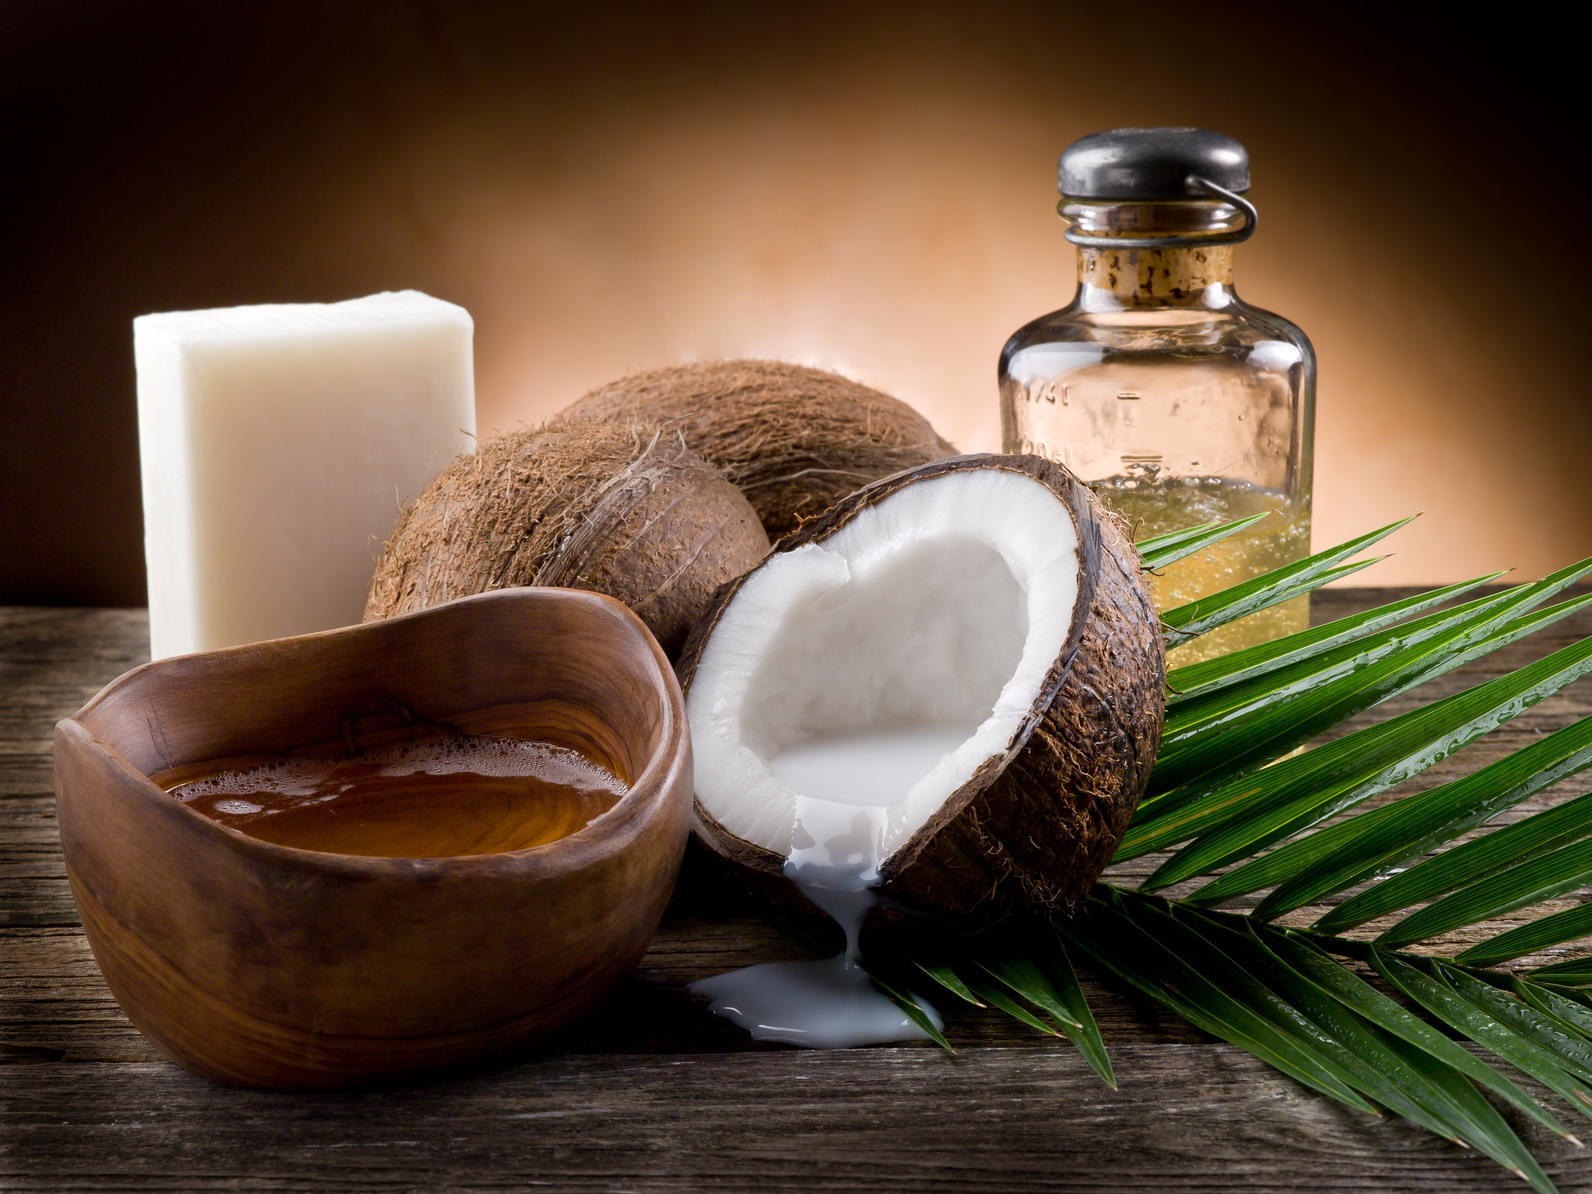 9 Every Day Uses For Coconut Oil. You Just Have To Know!